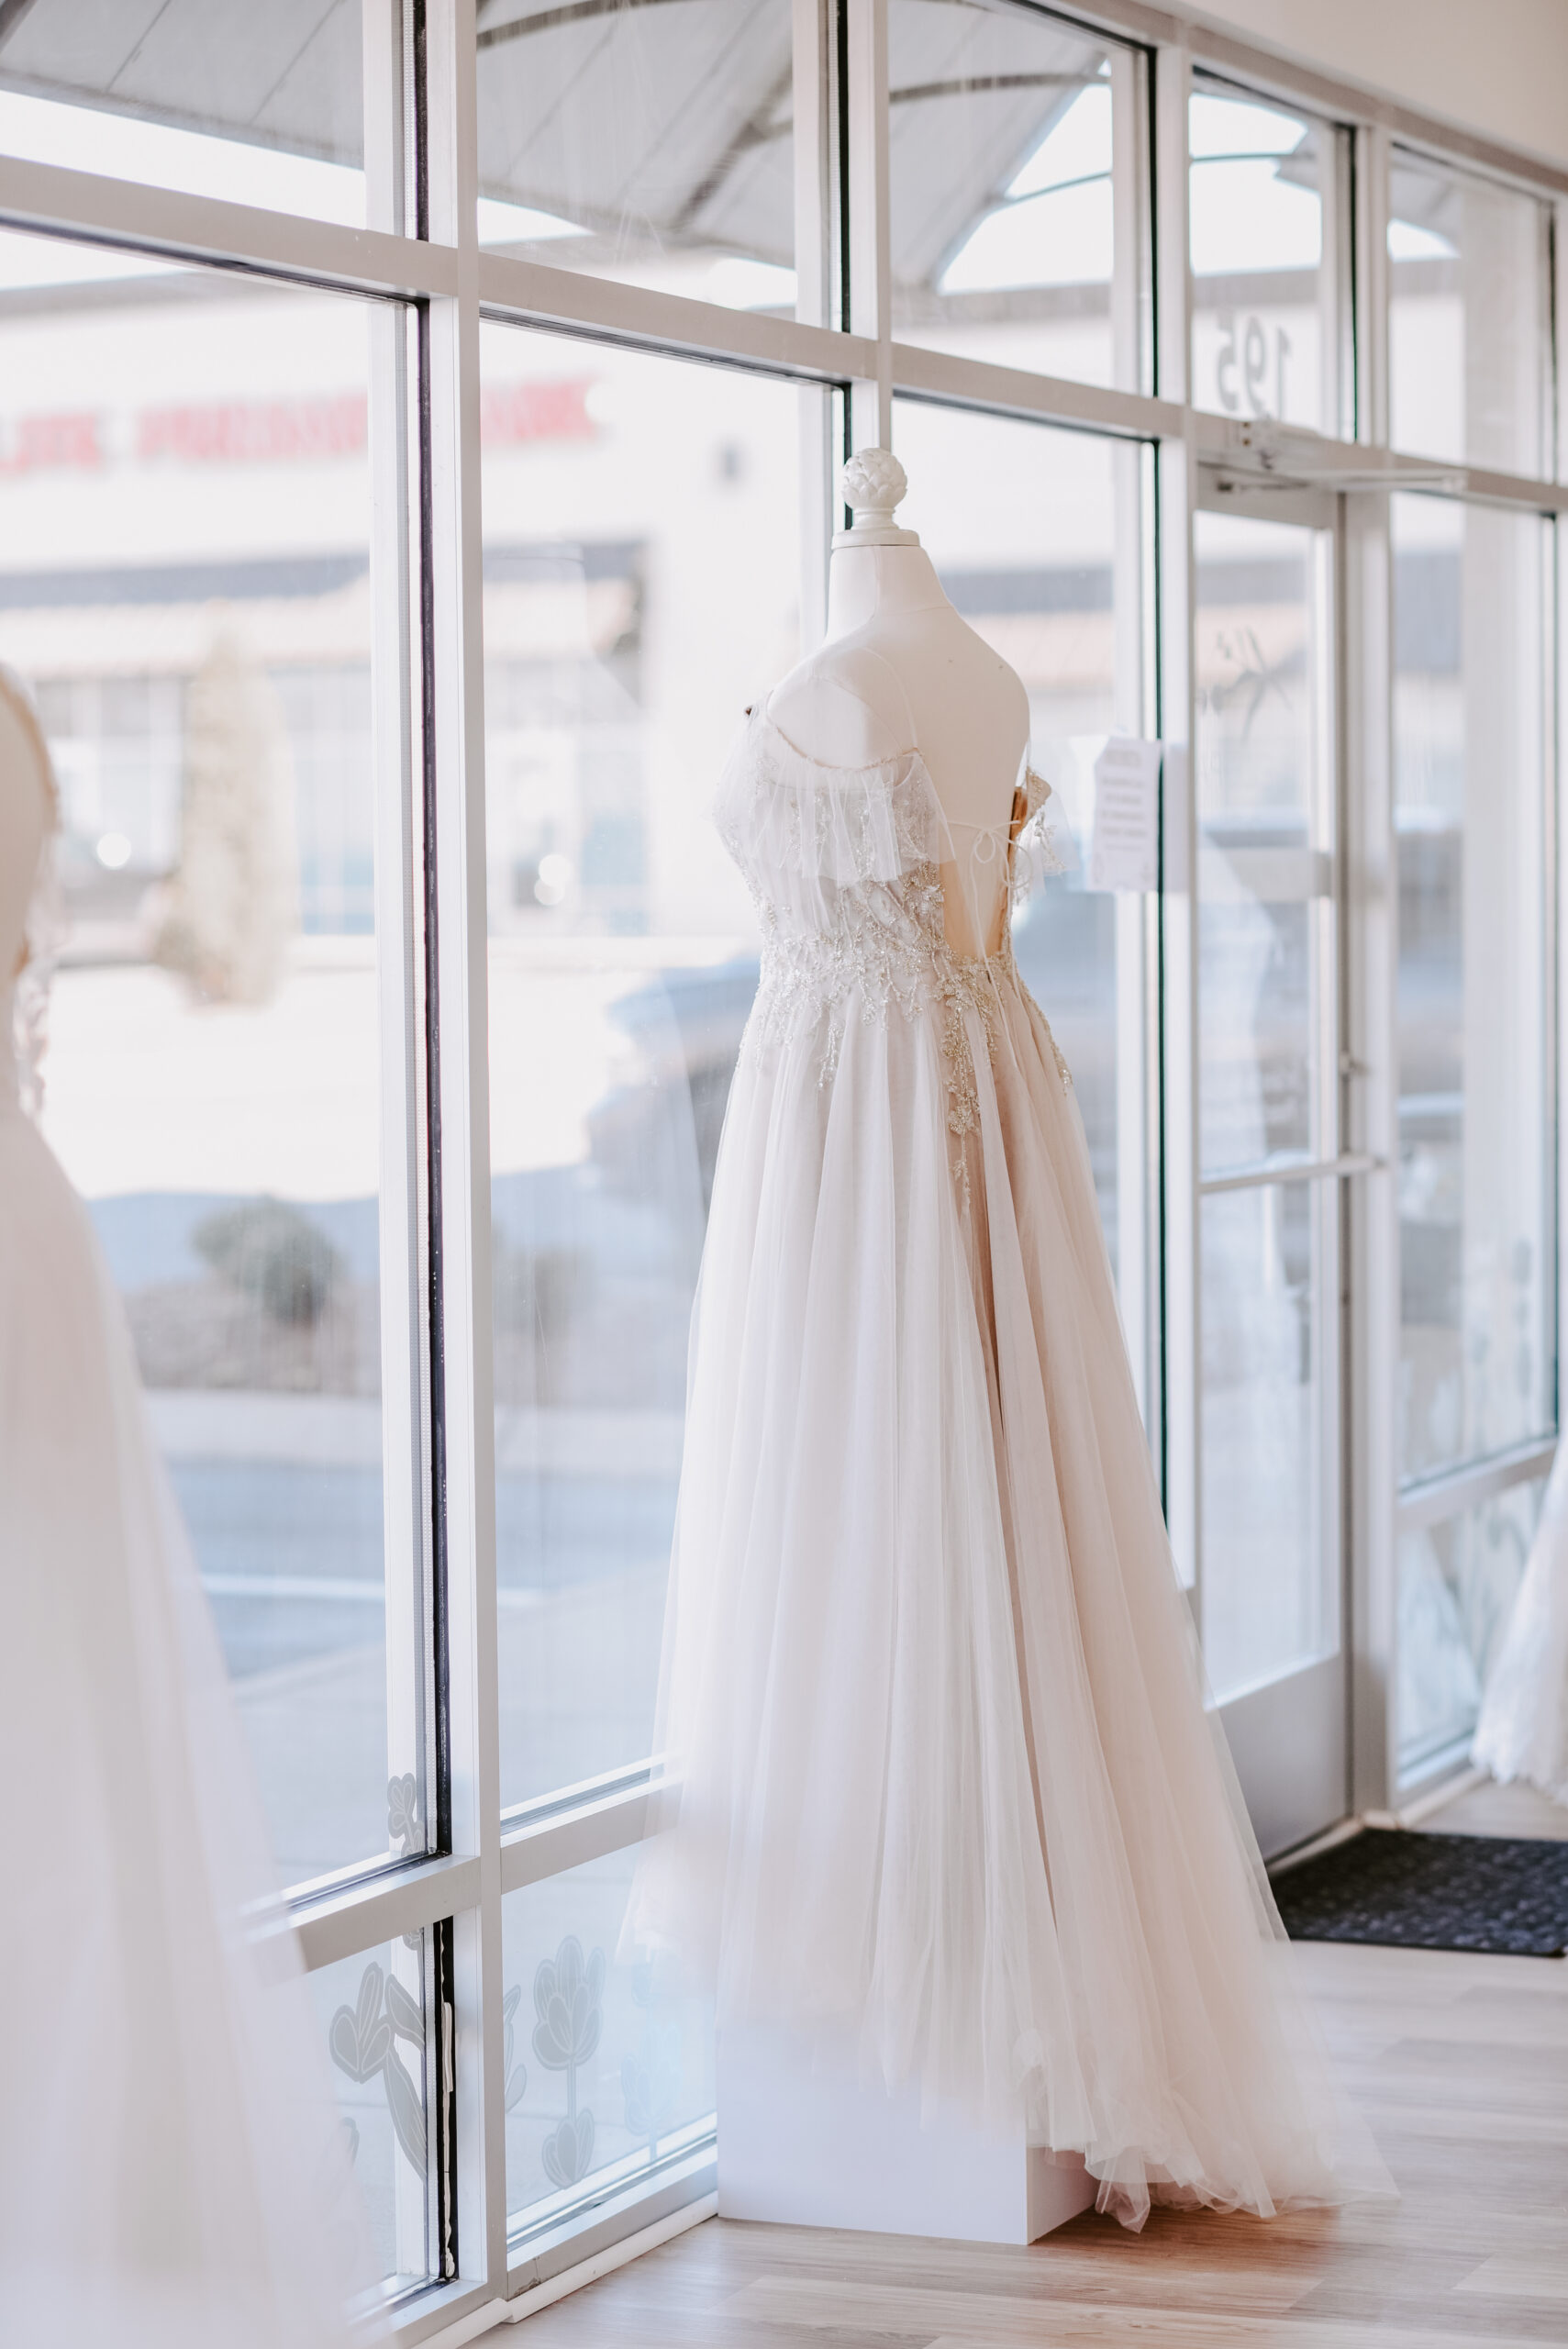 Reasons Why You Should Buy Your Wedding Dress from a Small Business Lavender Park Bridal